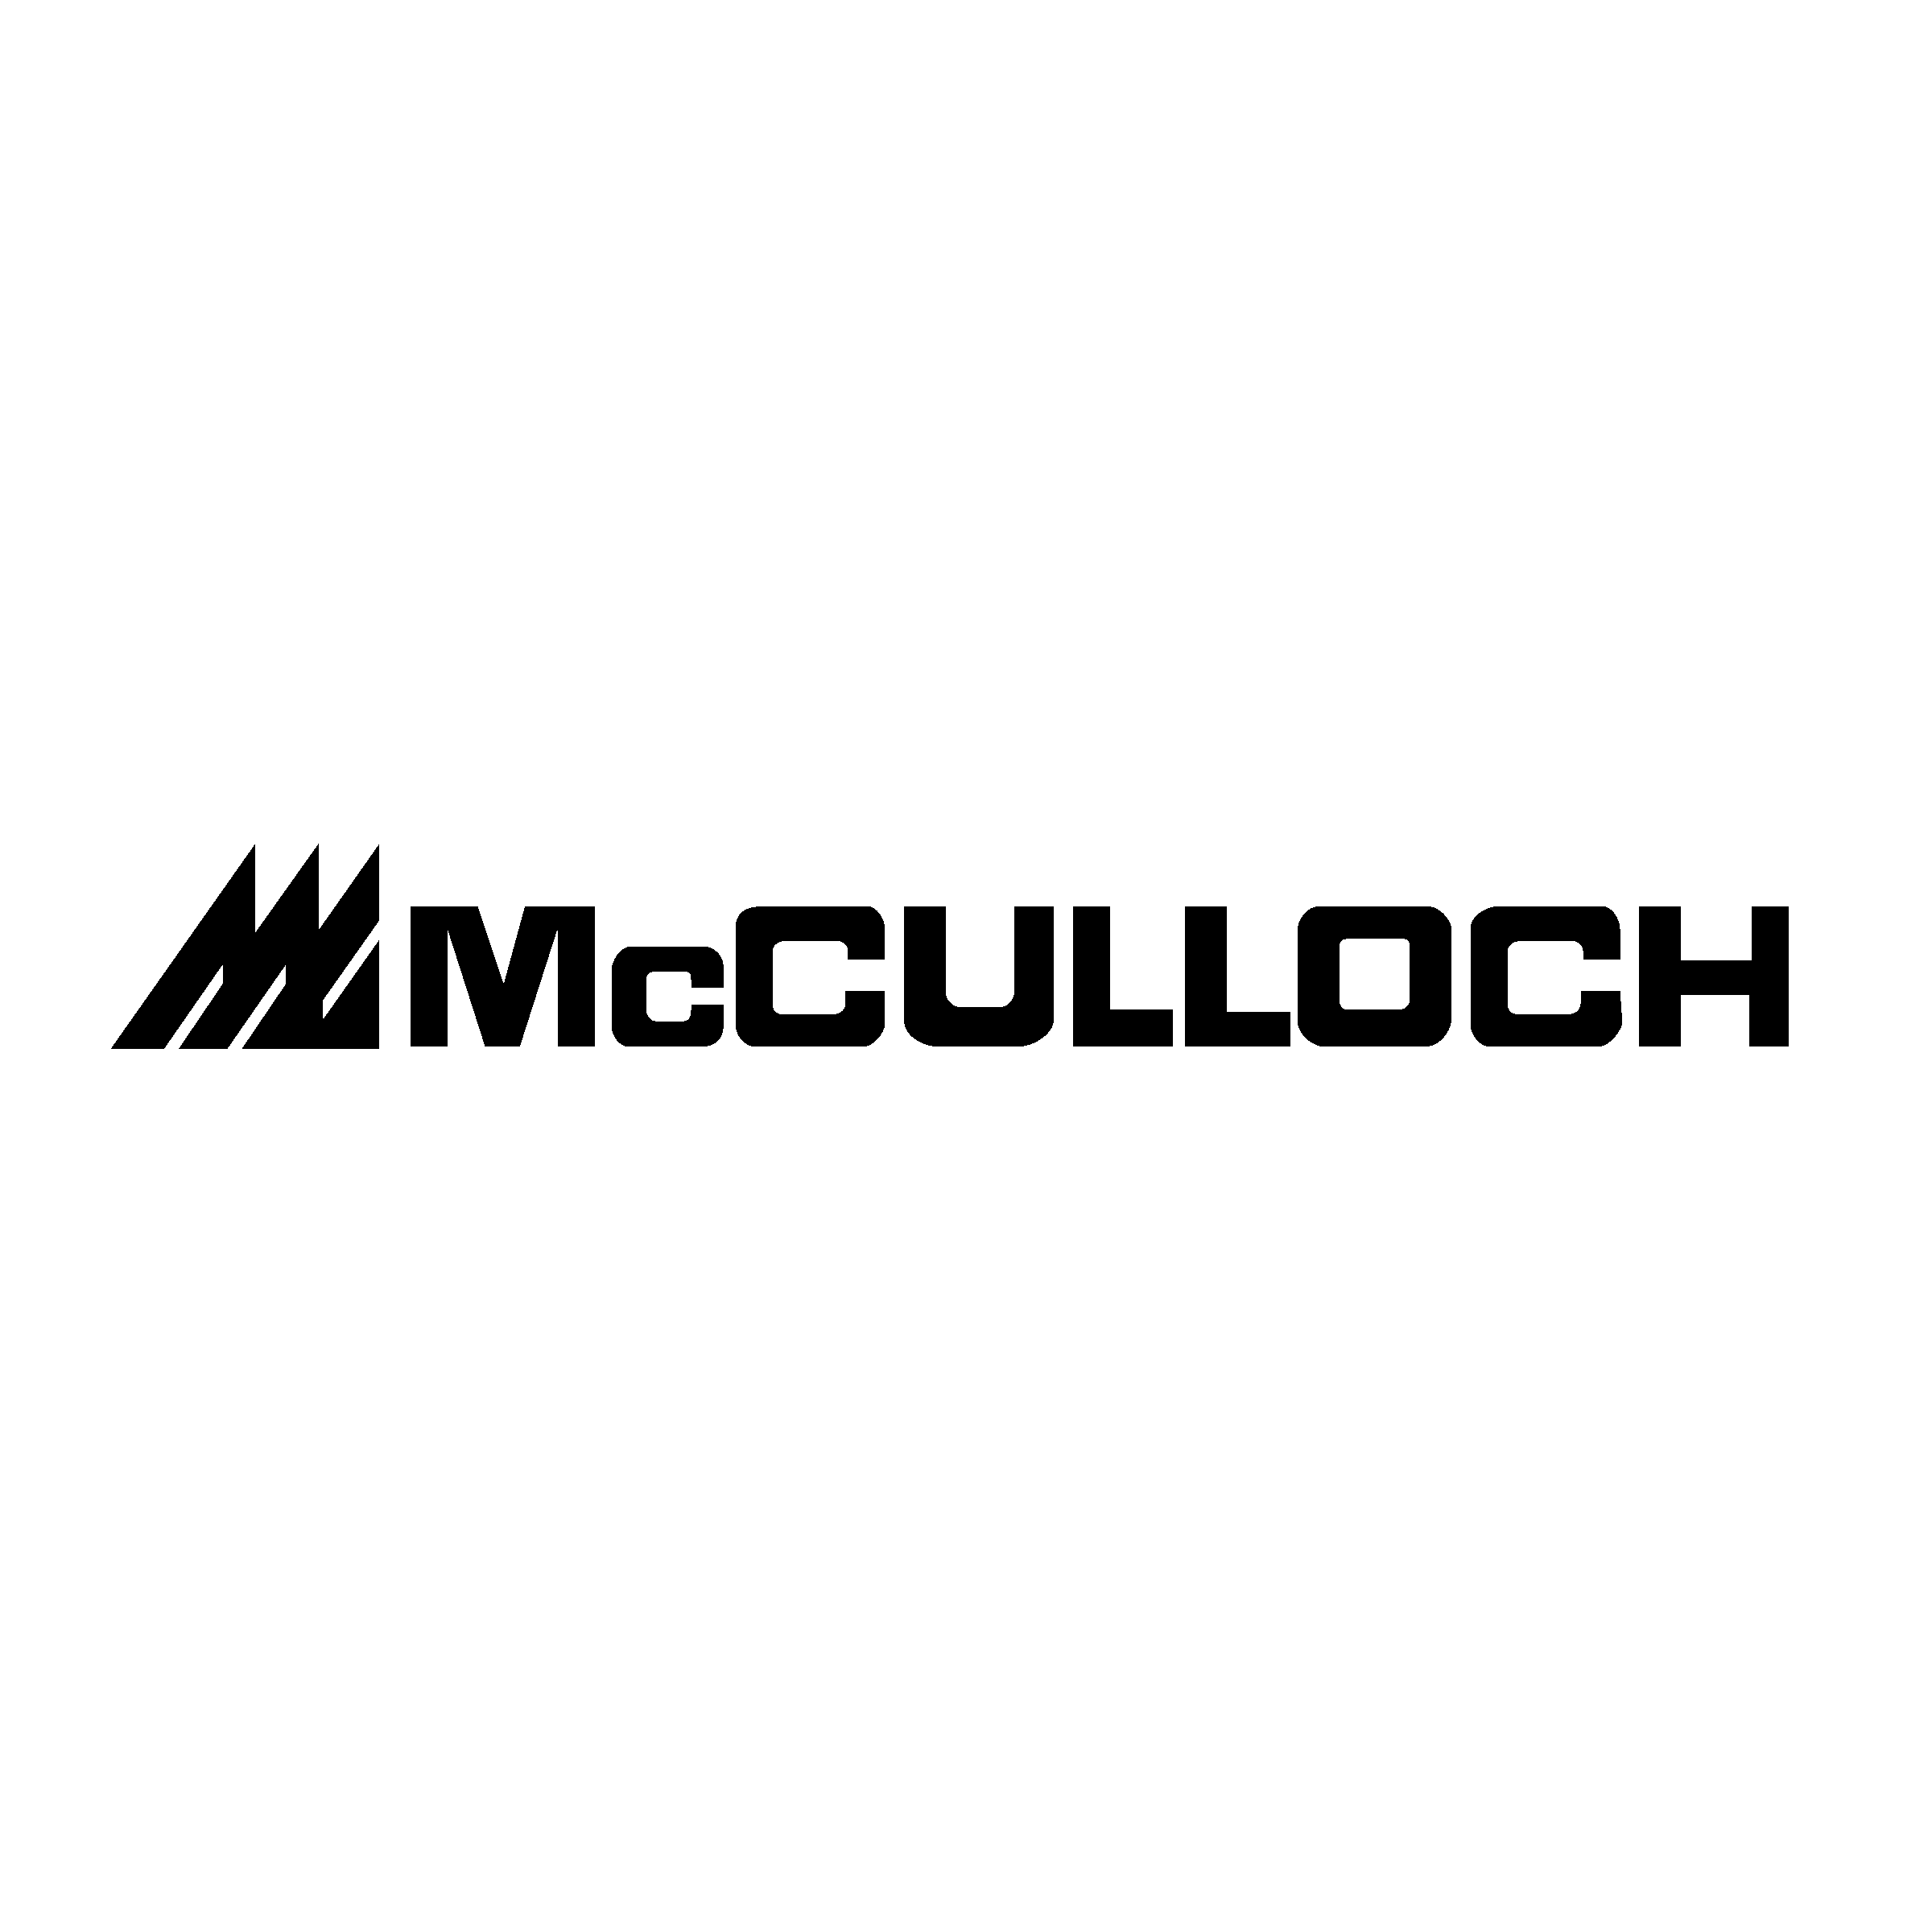 McCulloch Logo - McCulloch Logo PNG Transparent & SVG Vector - Freebie Supply